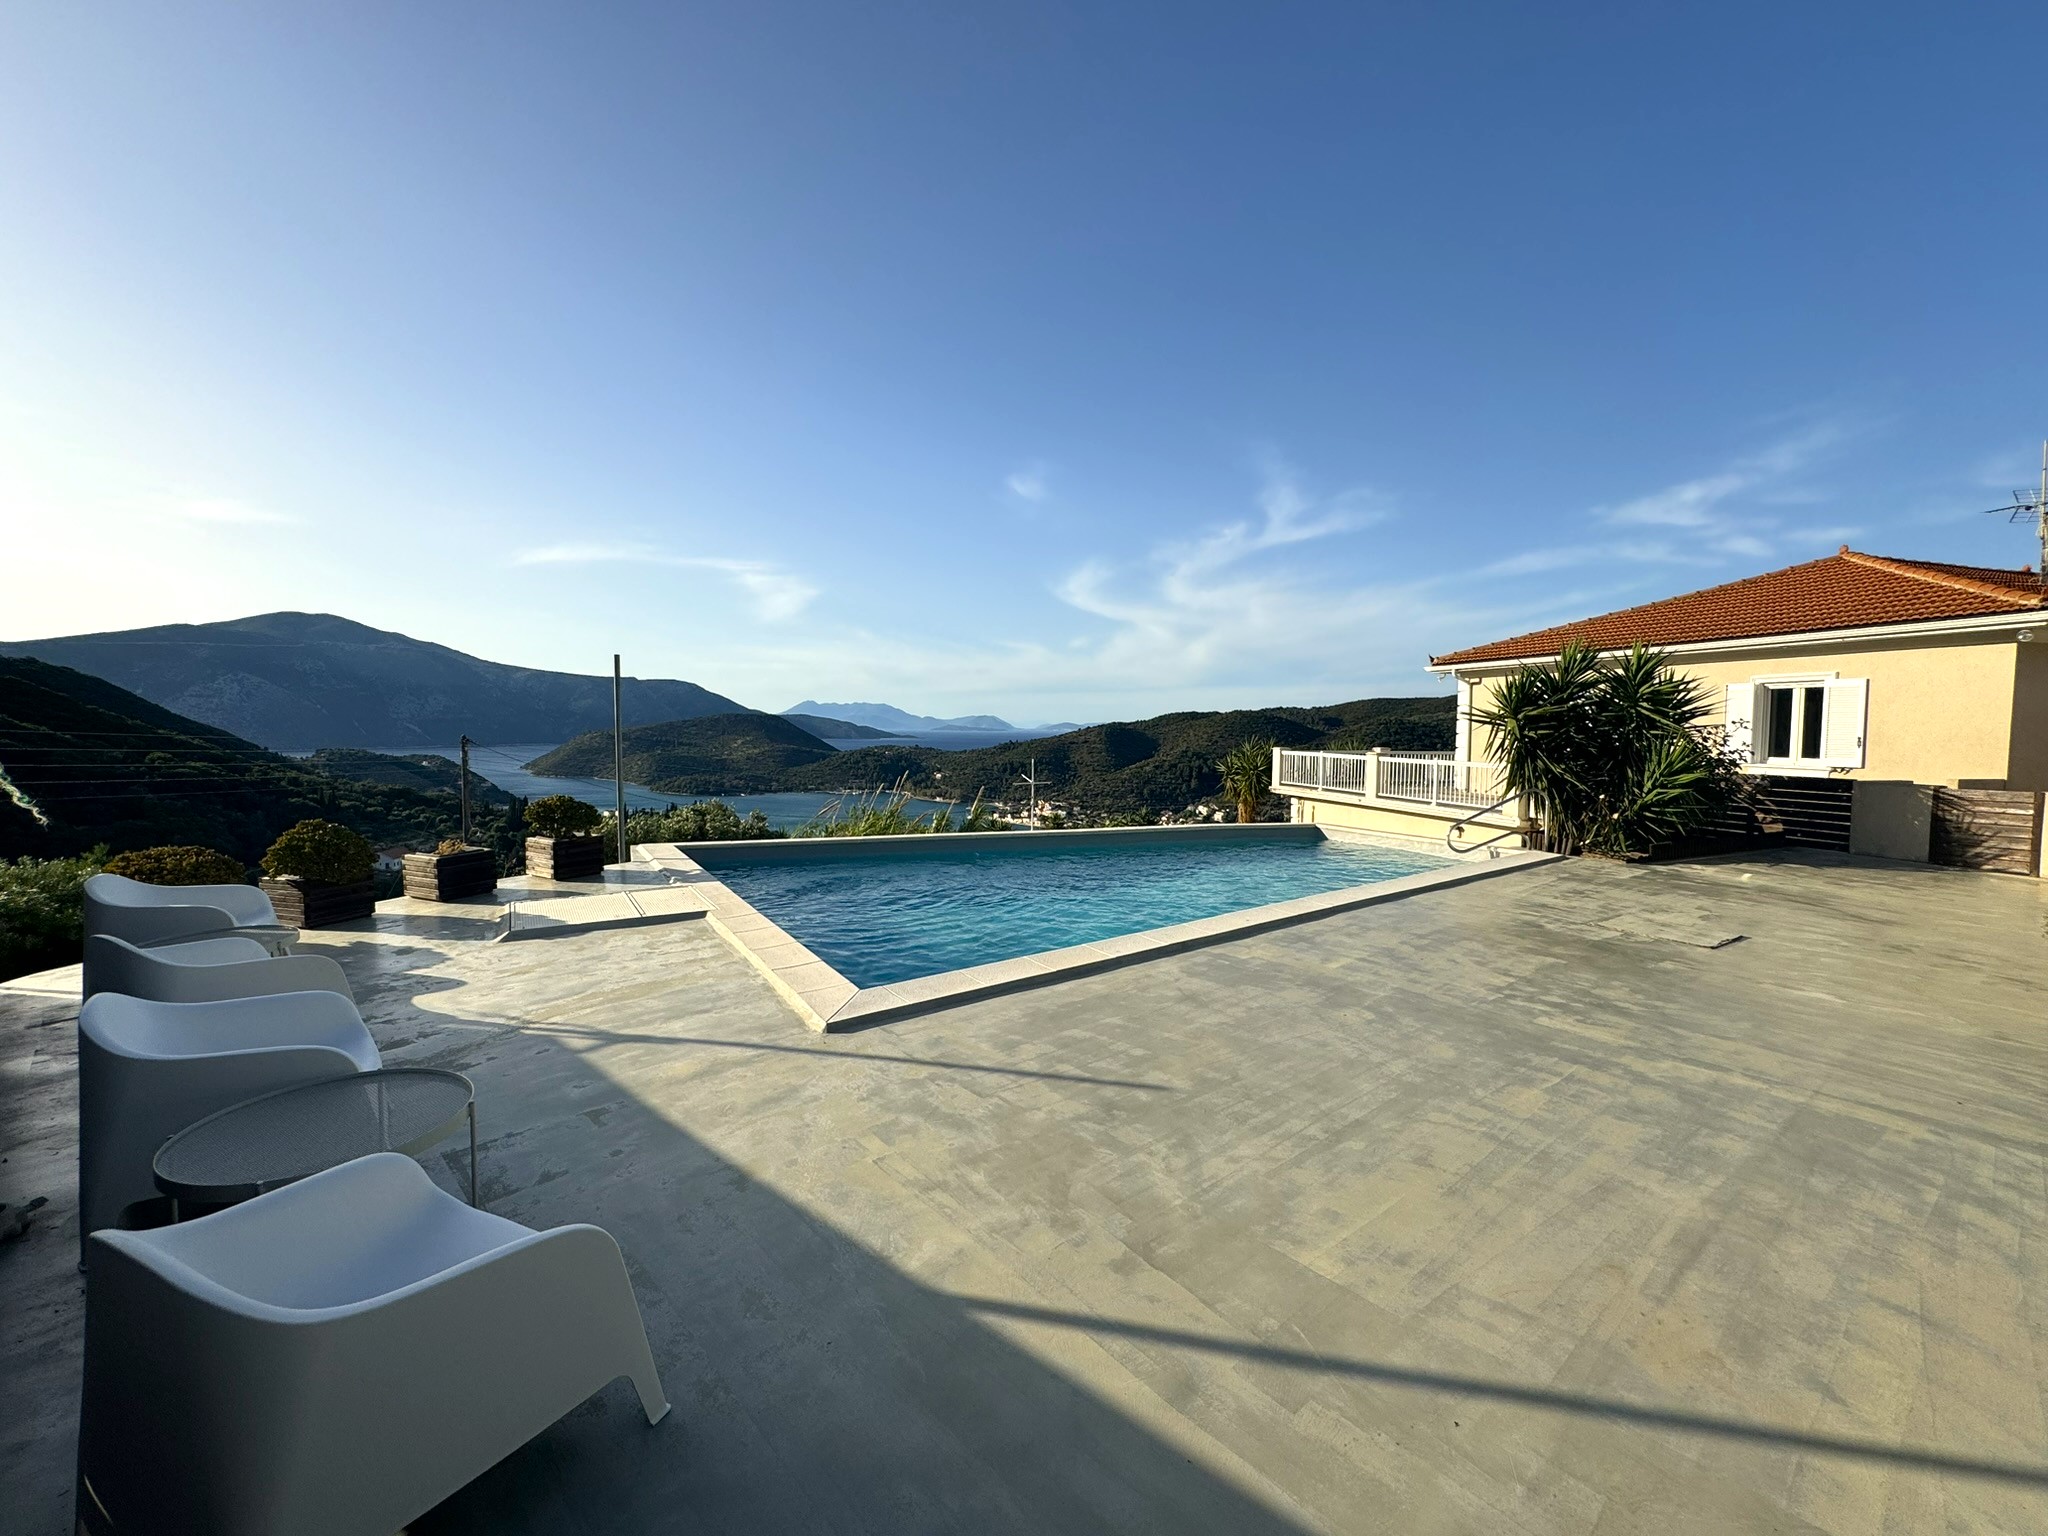 Pool area and views of villa for rent in Ithaca Greece Perachori